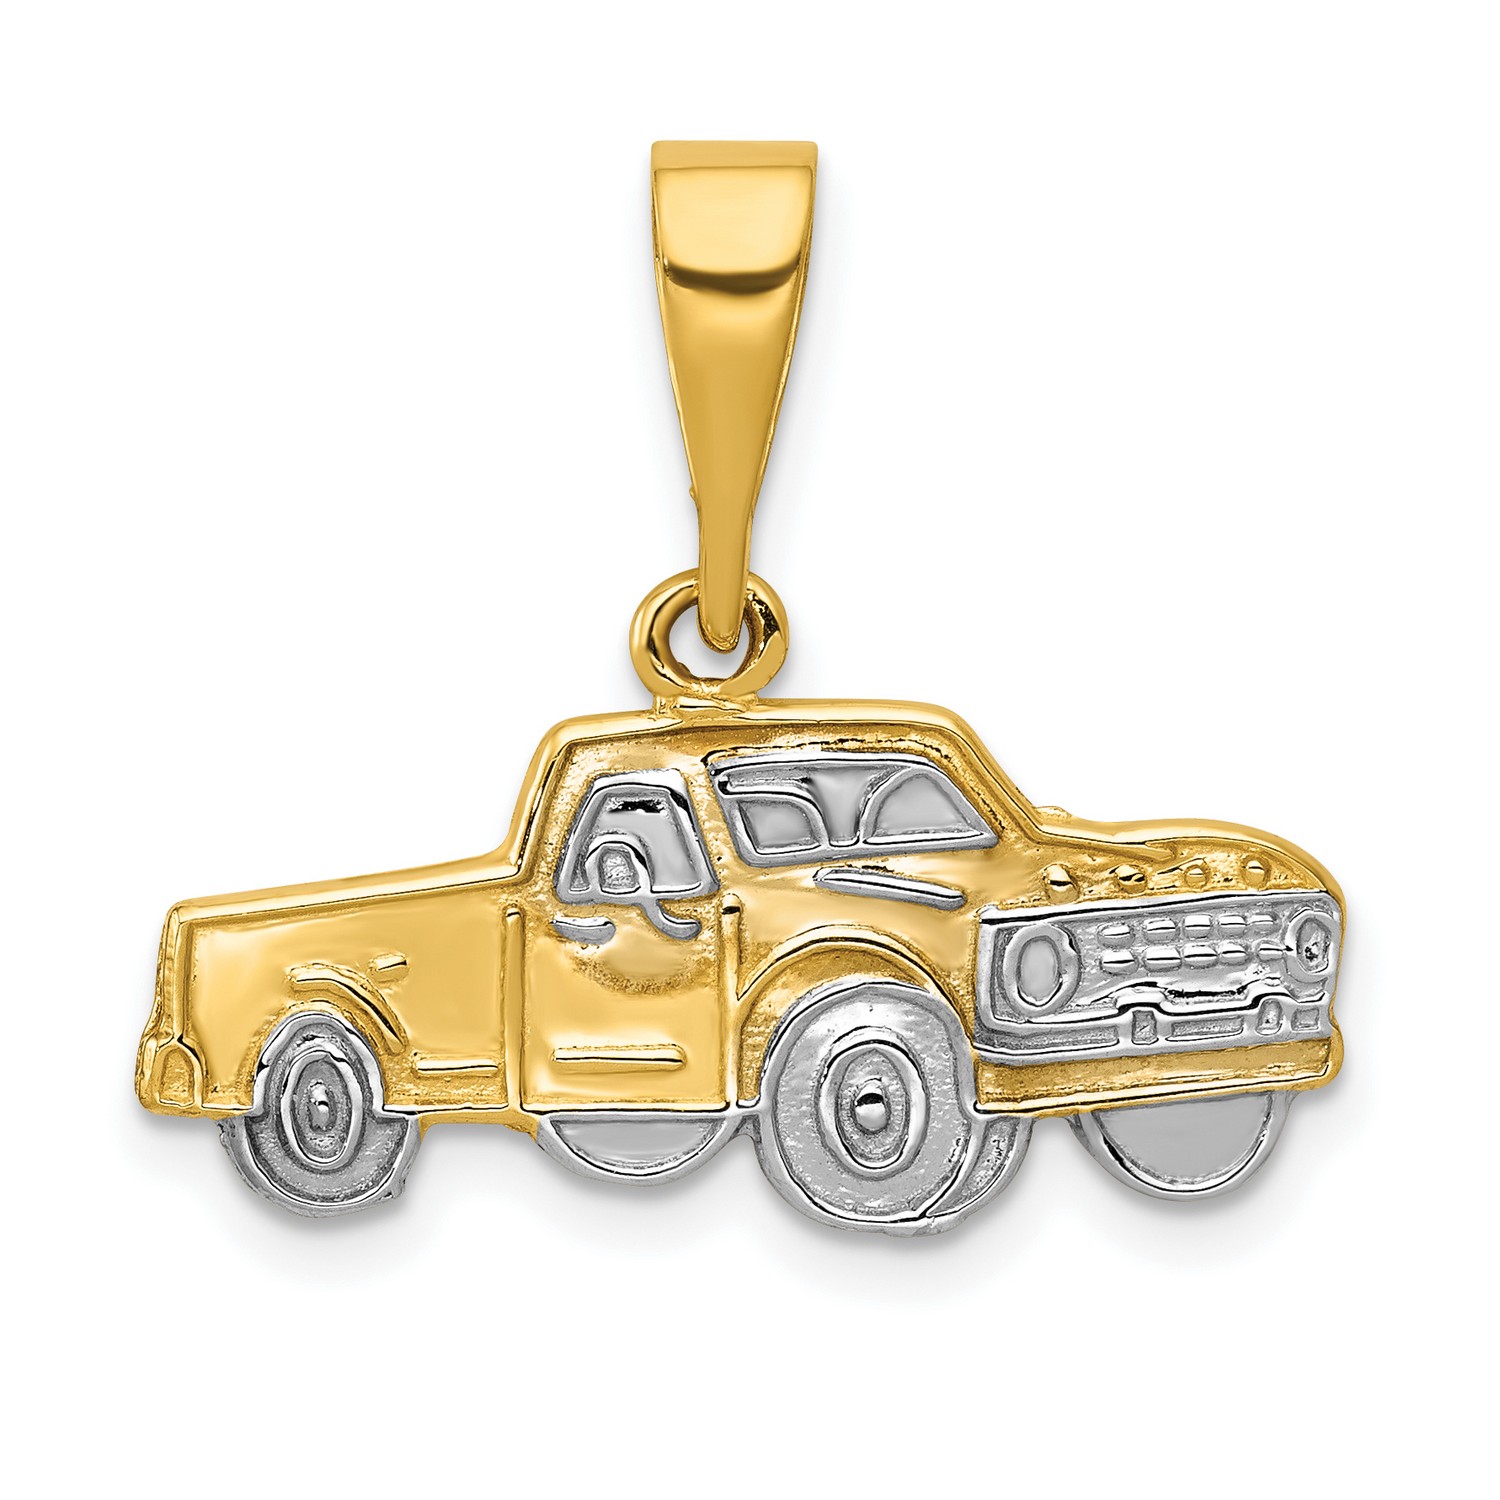 Pre-owned Jewelry Stores Network 14k Yellow Gold Pick-up Truck Charm Pendant Tires And Accents